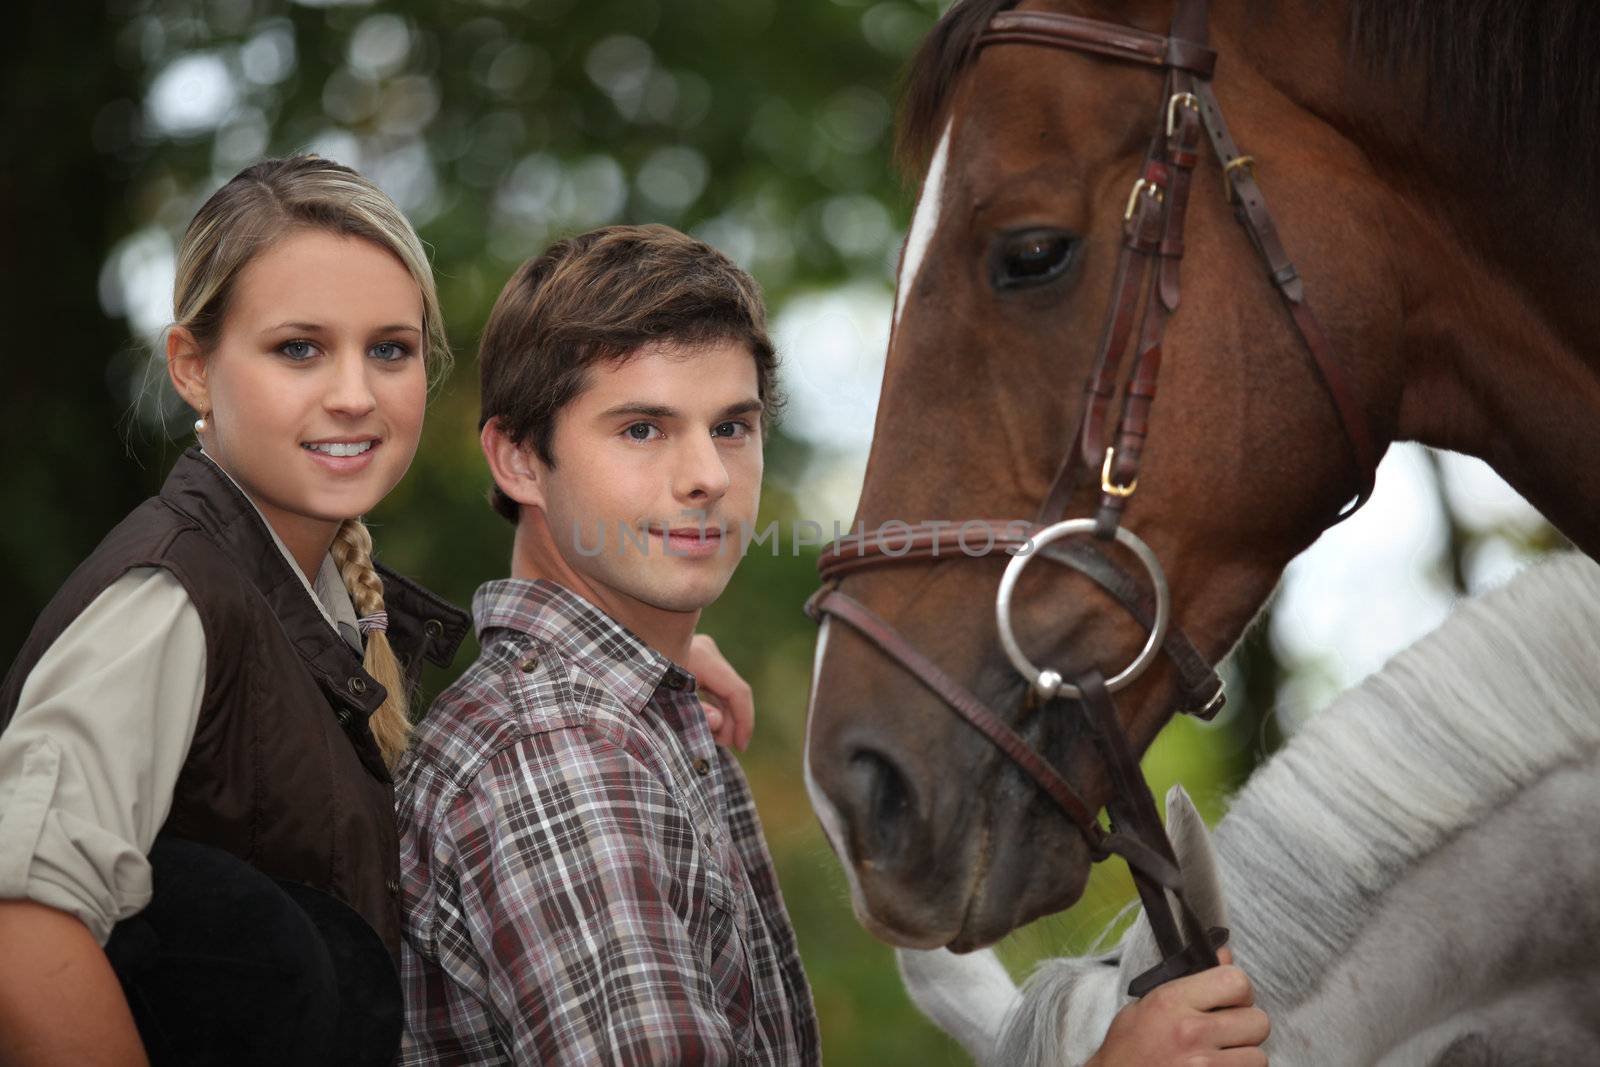 two young people and a horse